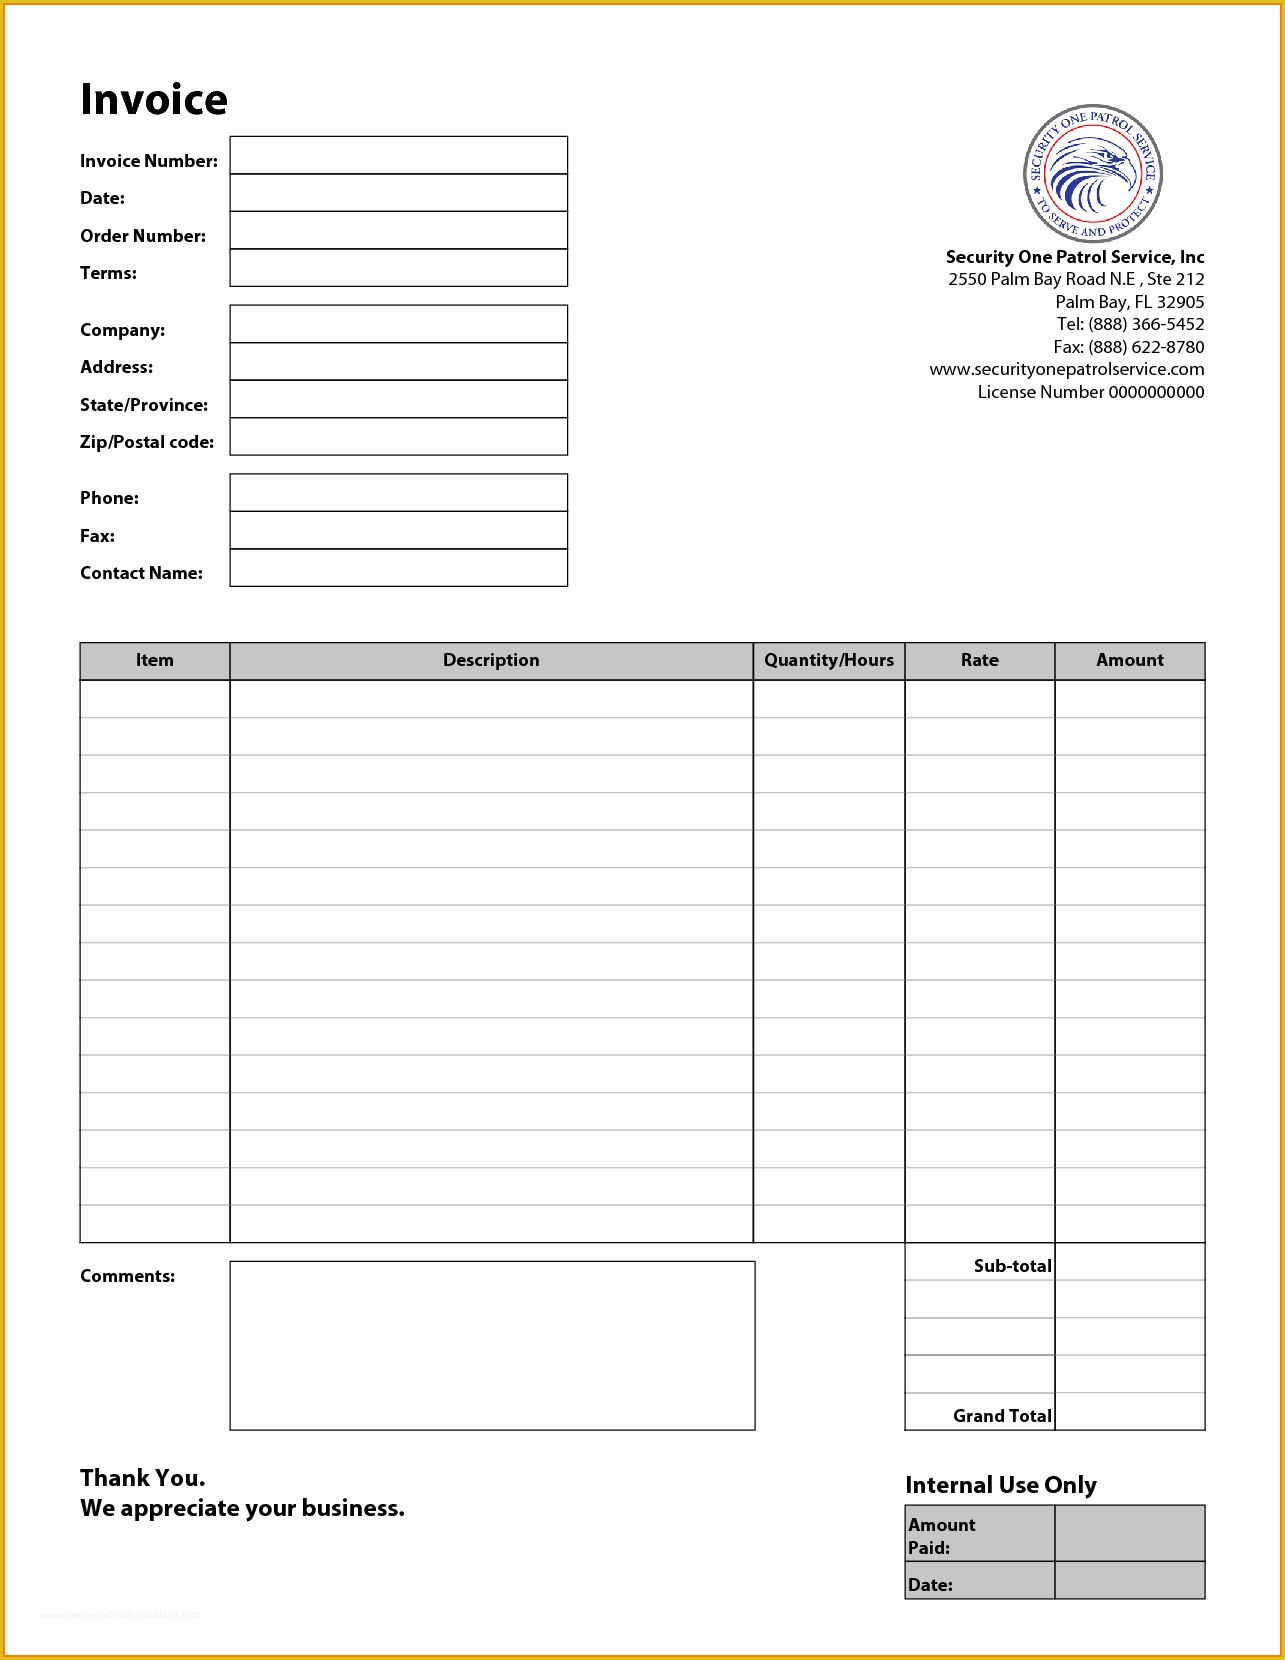 Free Payroll Invoice Template Of Payroll Invoice Template Portablegasgrillweber